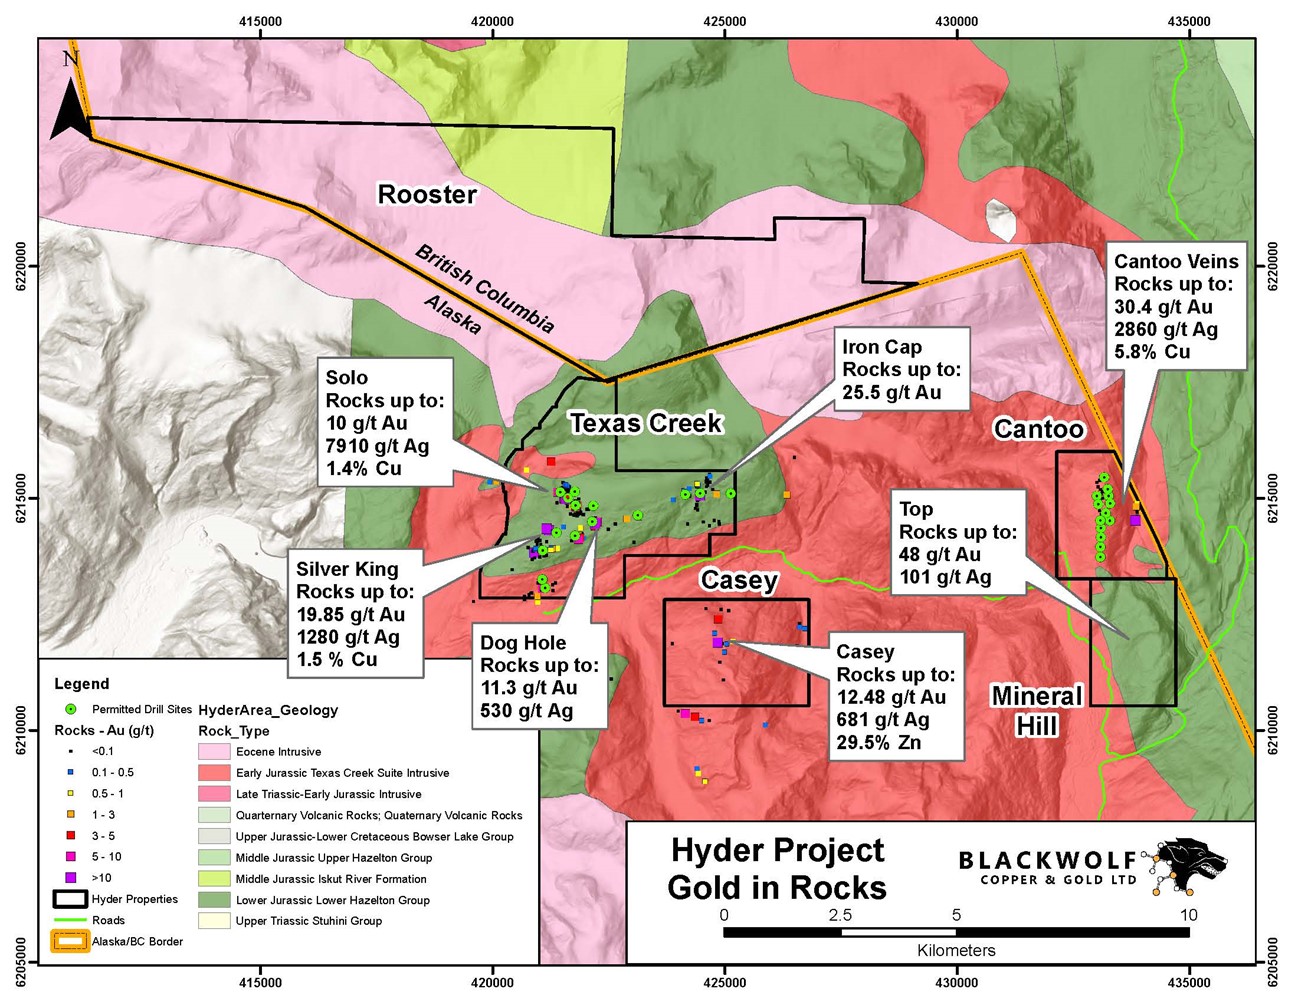 Blackwolf Copper and Gold Ltd, Tuesday, September 27, 2022, Press release picture